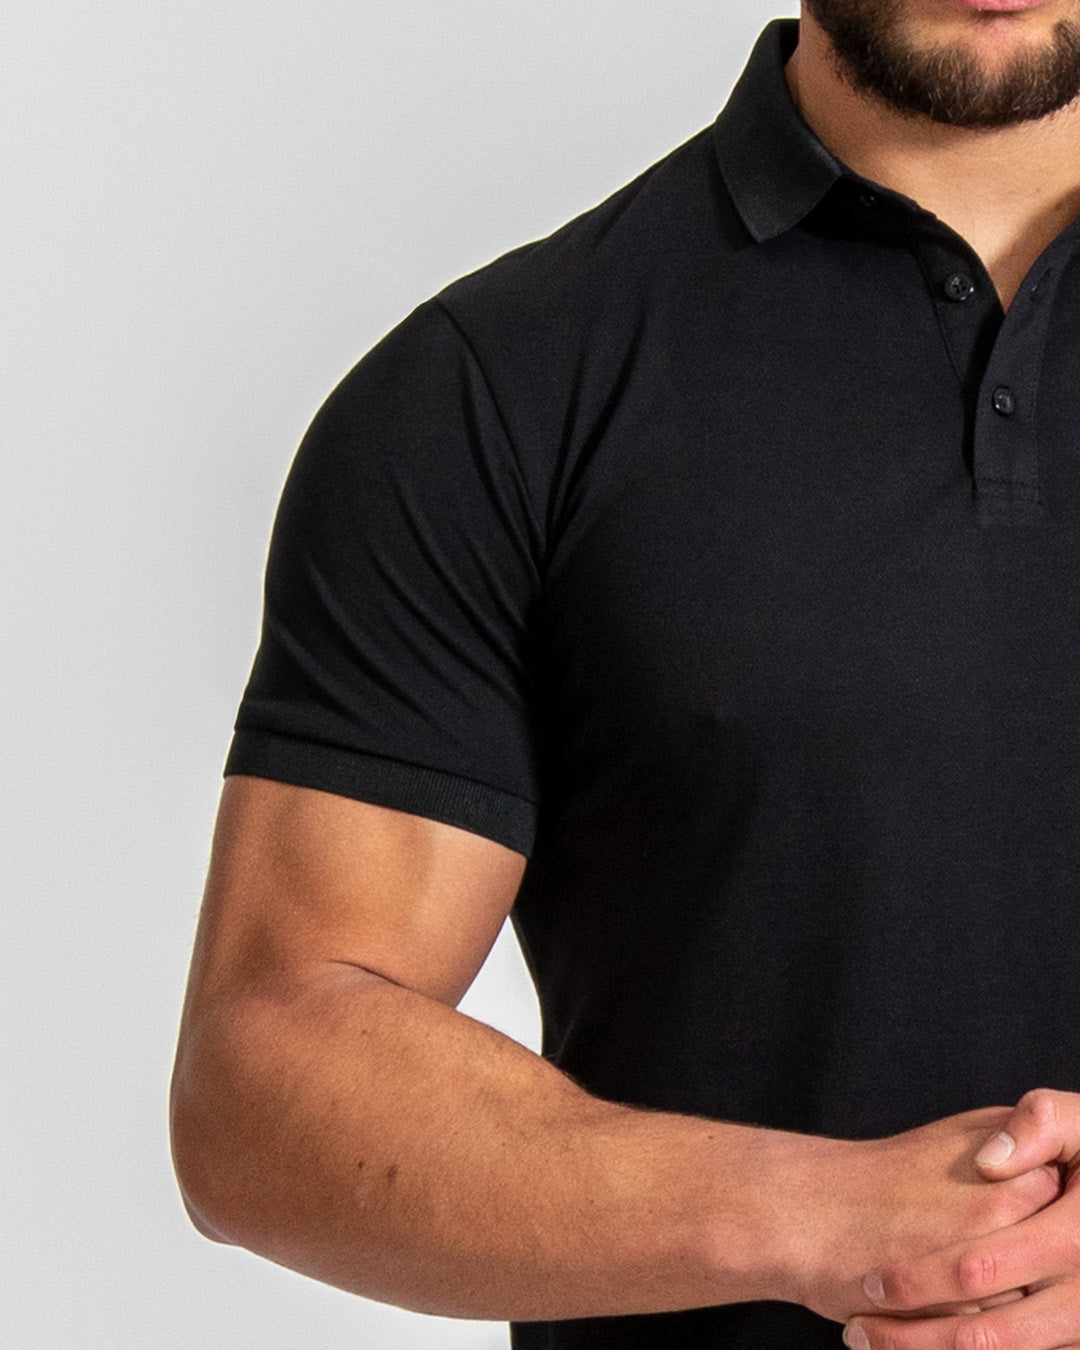 Muscle Fitted Plain Pique Polo T-Shirt — Black